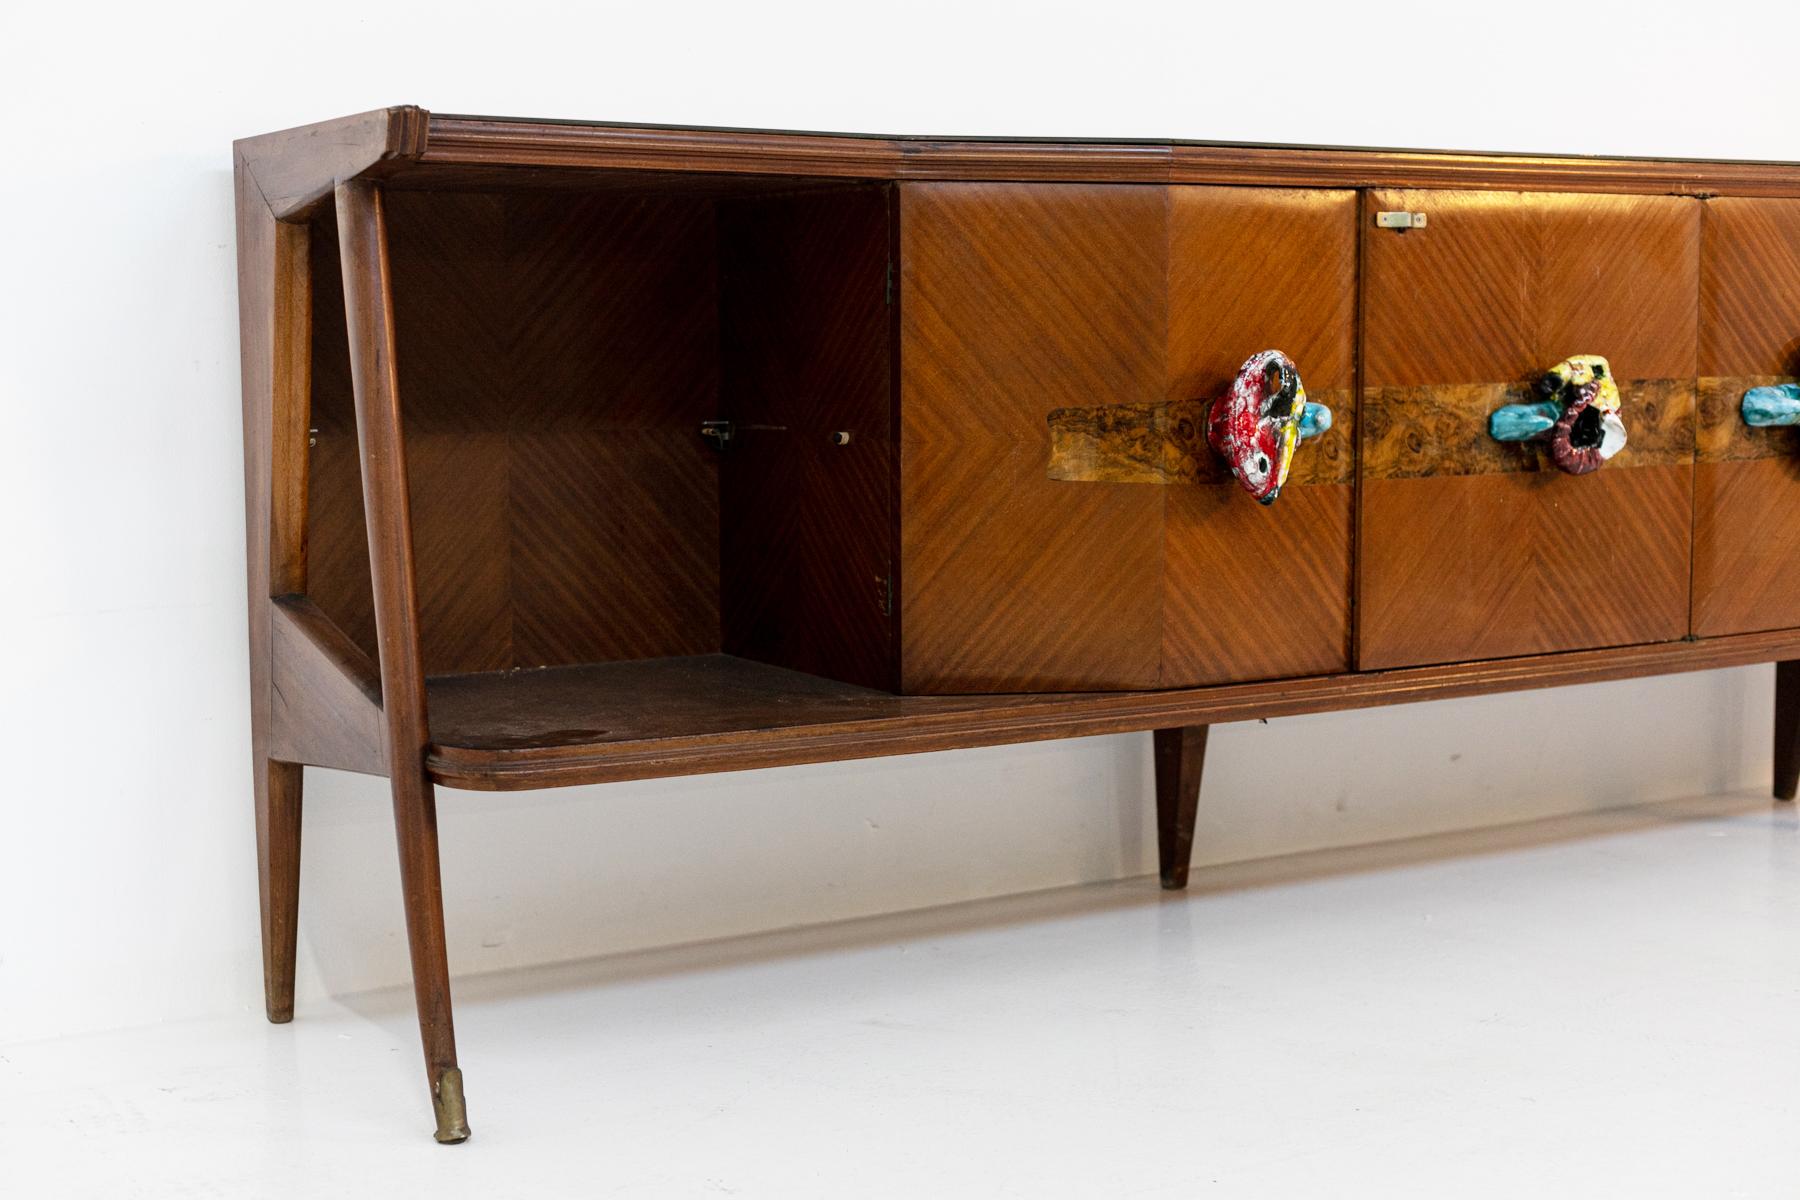 Mid-20th Century Italian Sideboard in Precious Woods and Ceramic Handles